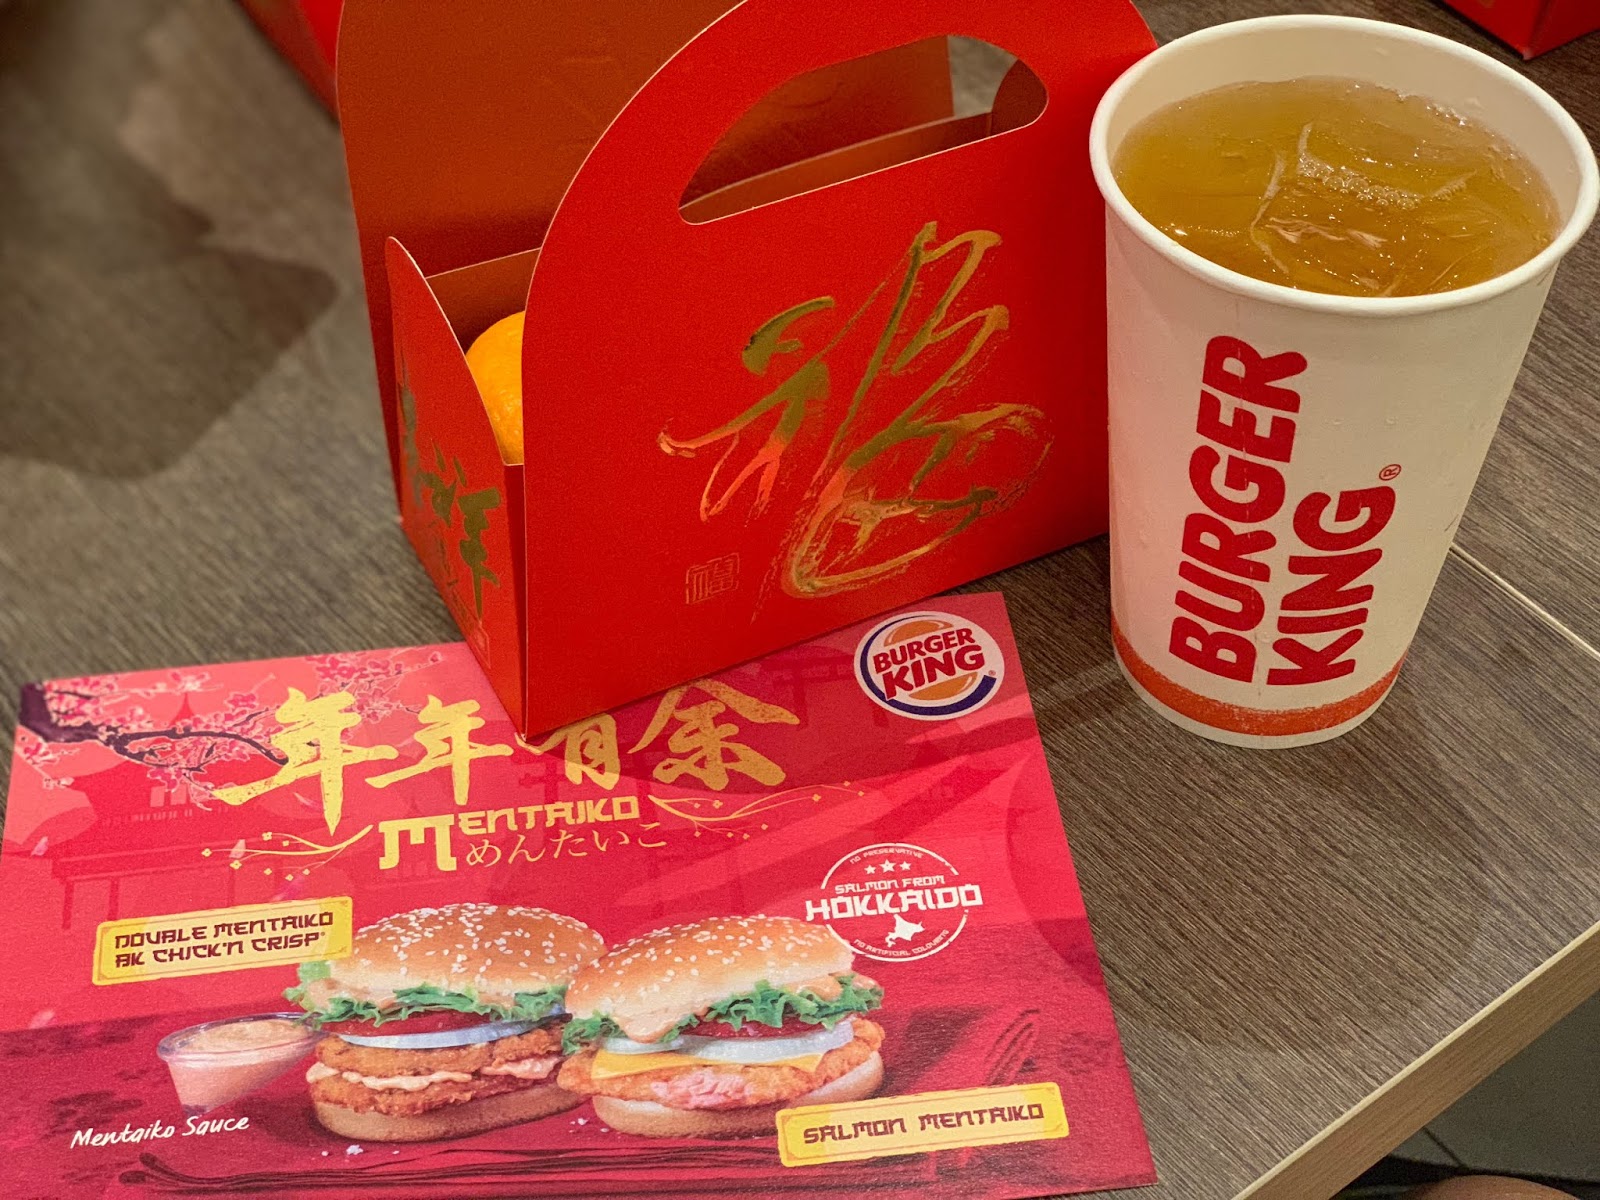 Abundant Fortune With Four Tune Box And Burger King Mentaiko Burgers